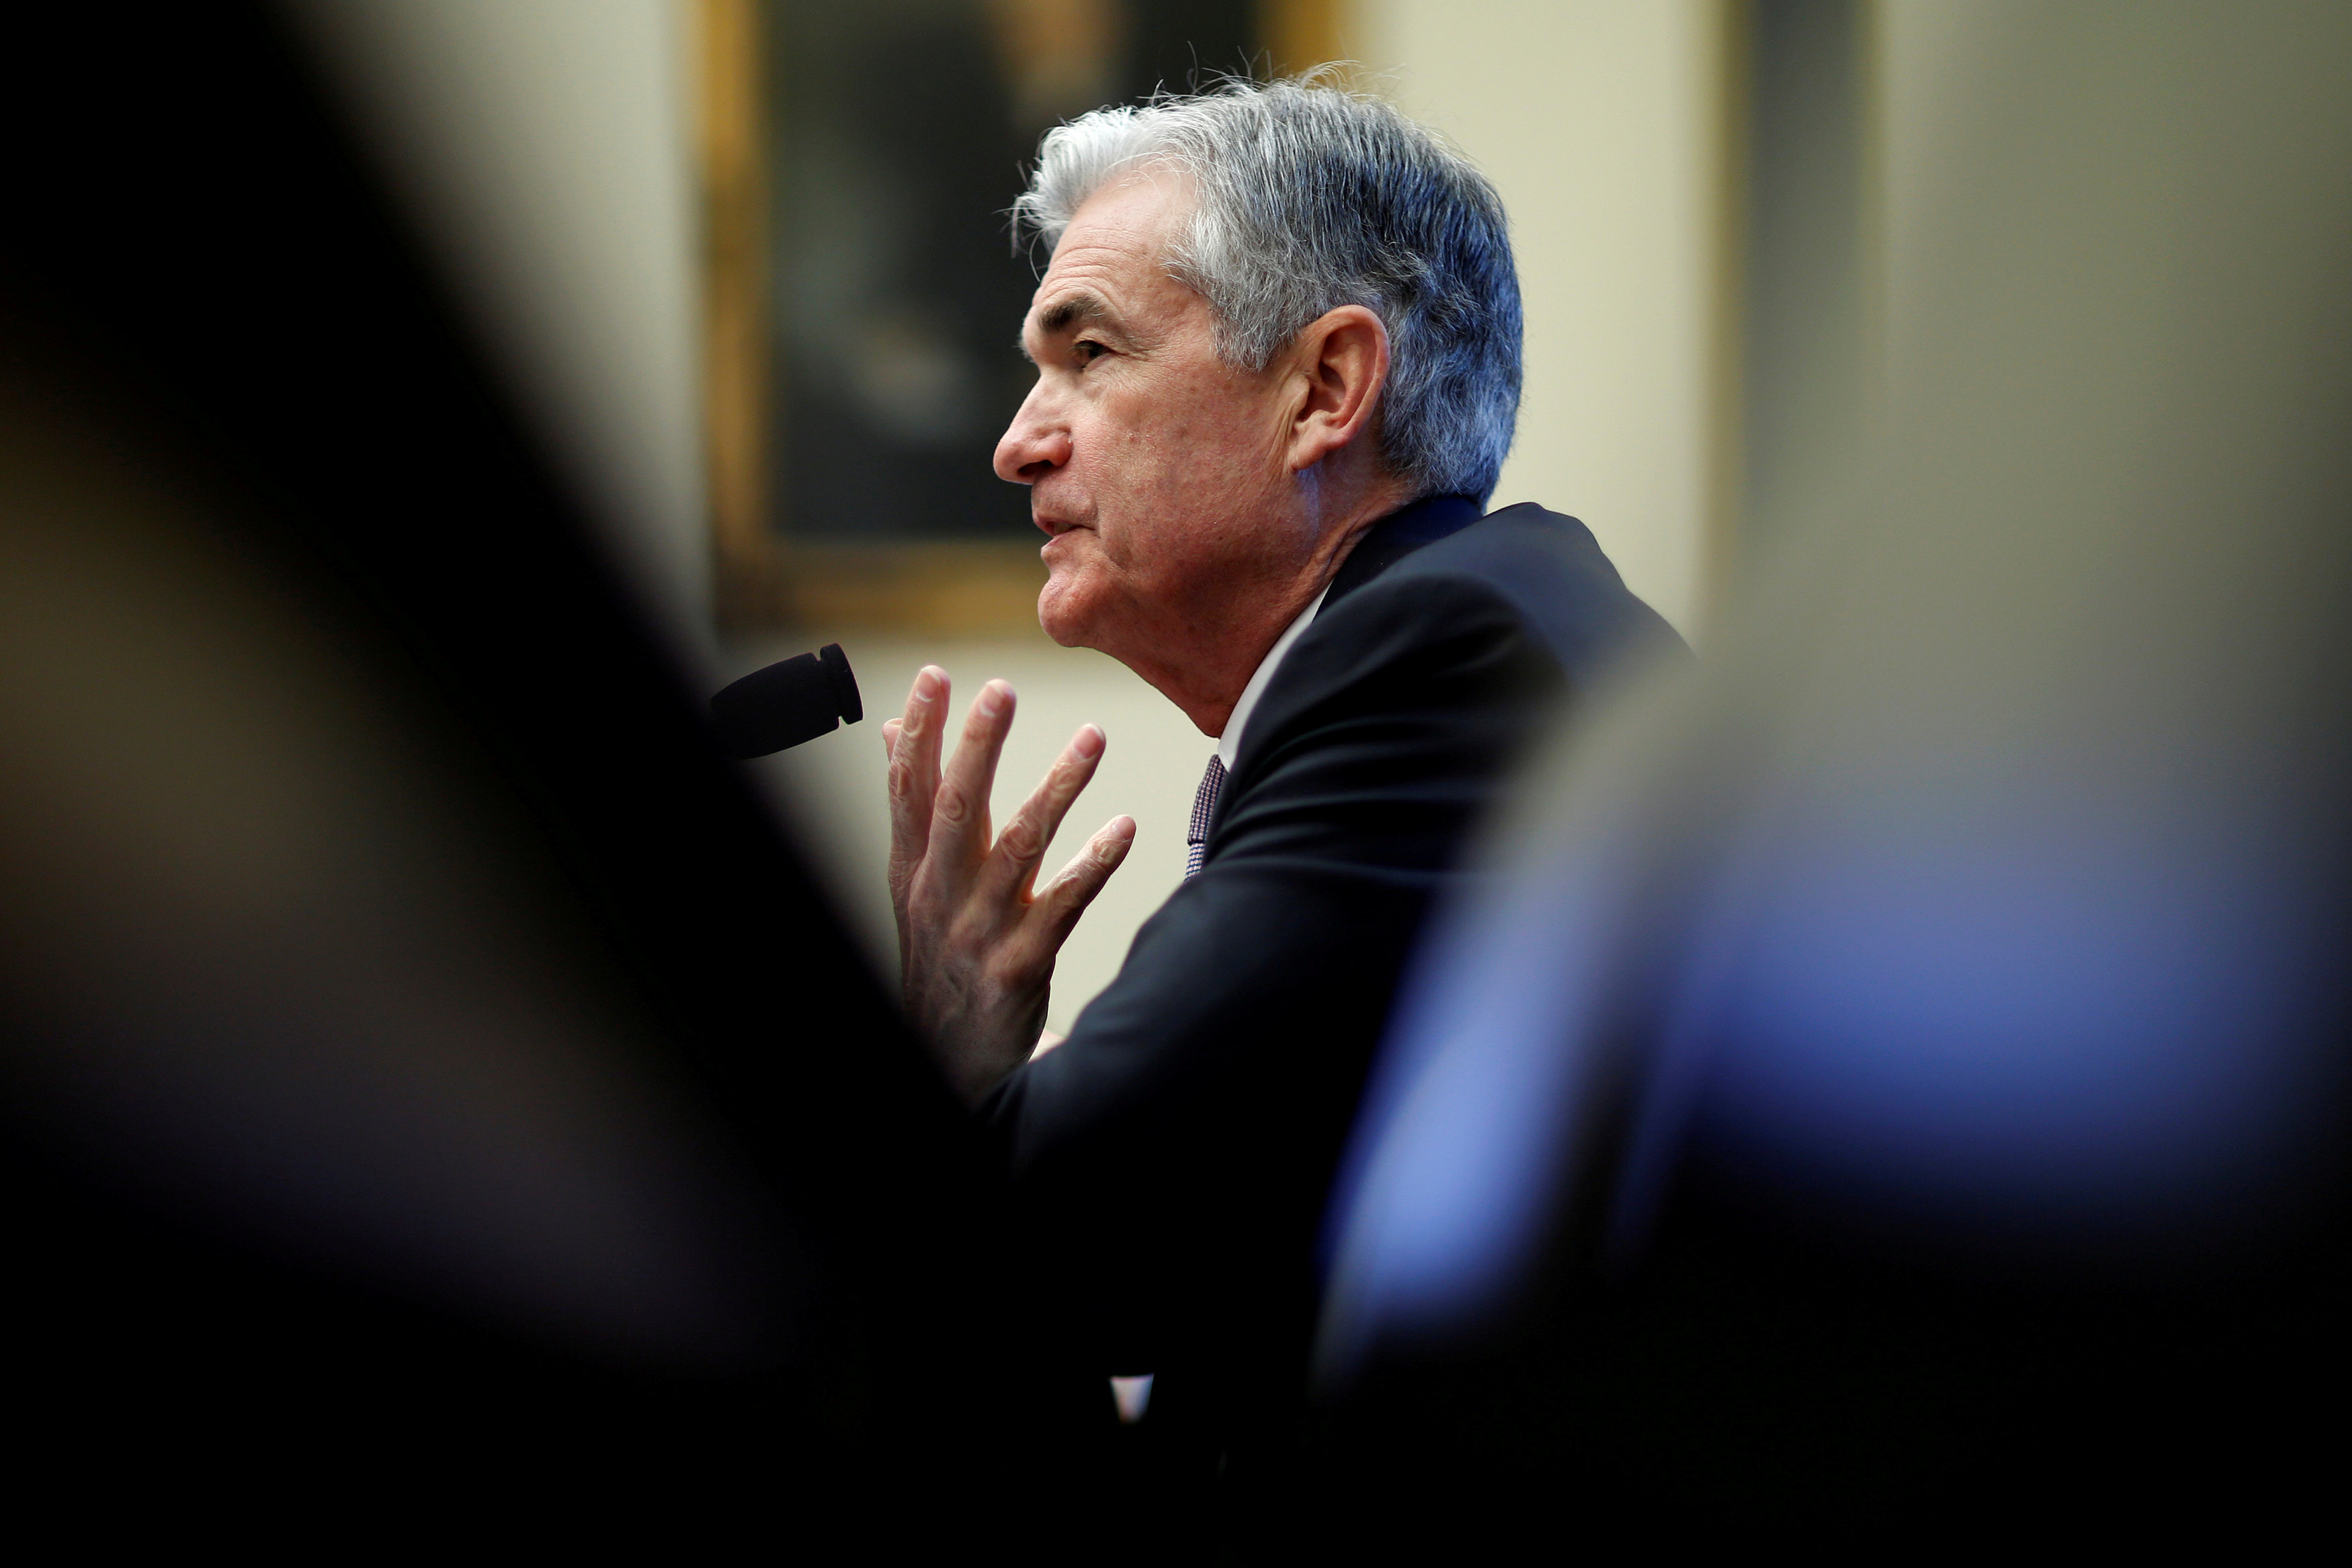 Powell's Fed to show policy caution, shun political friction